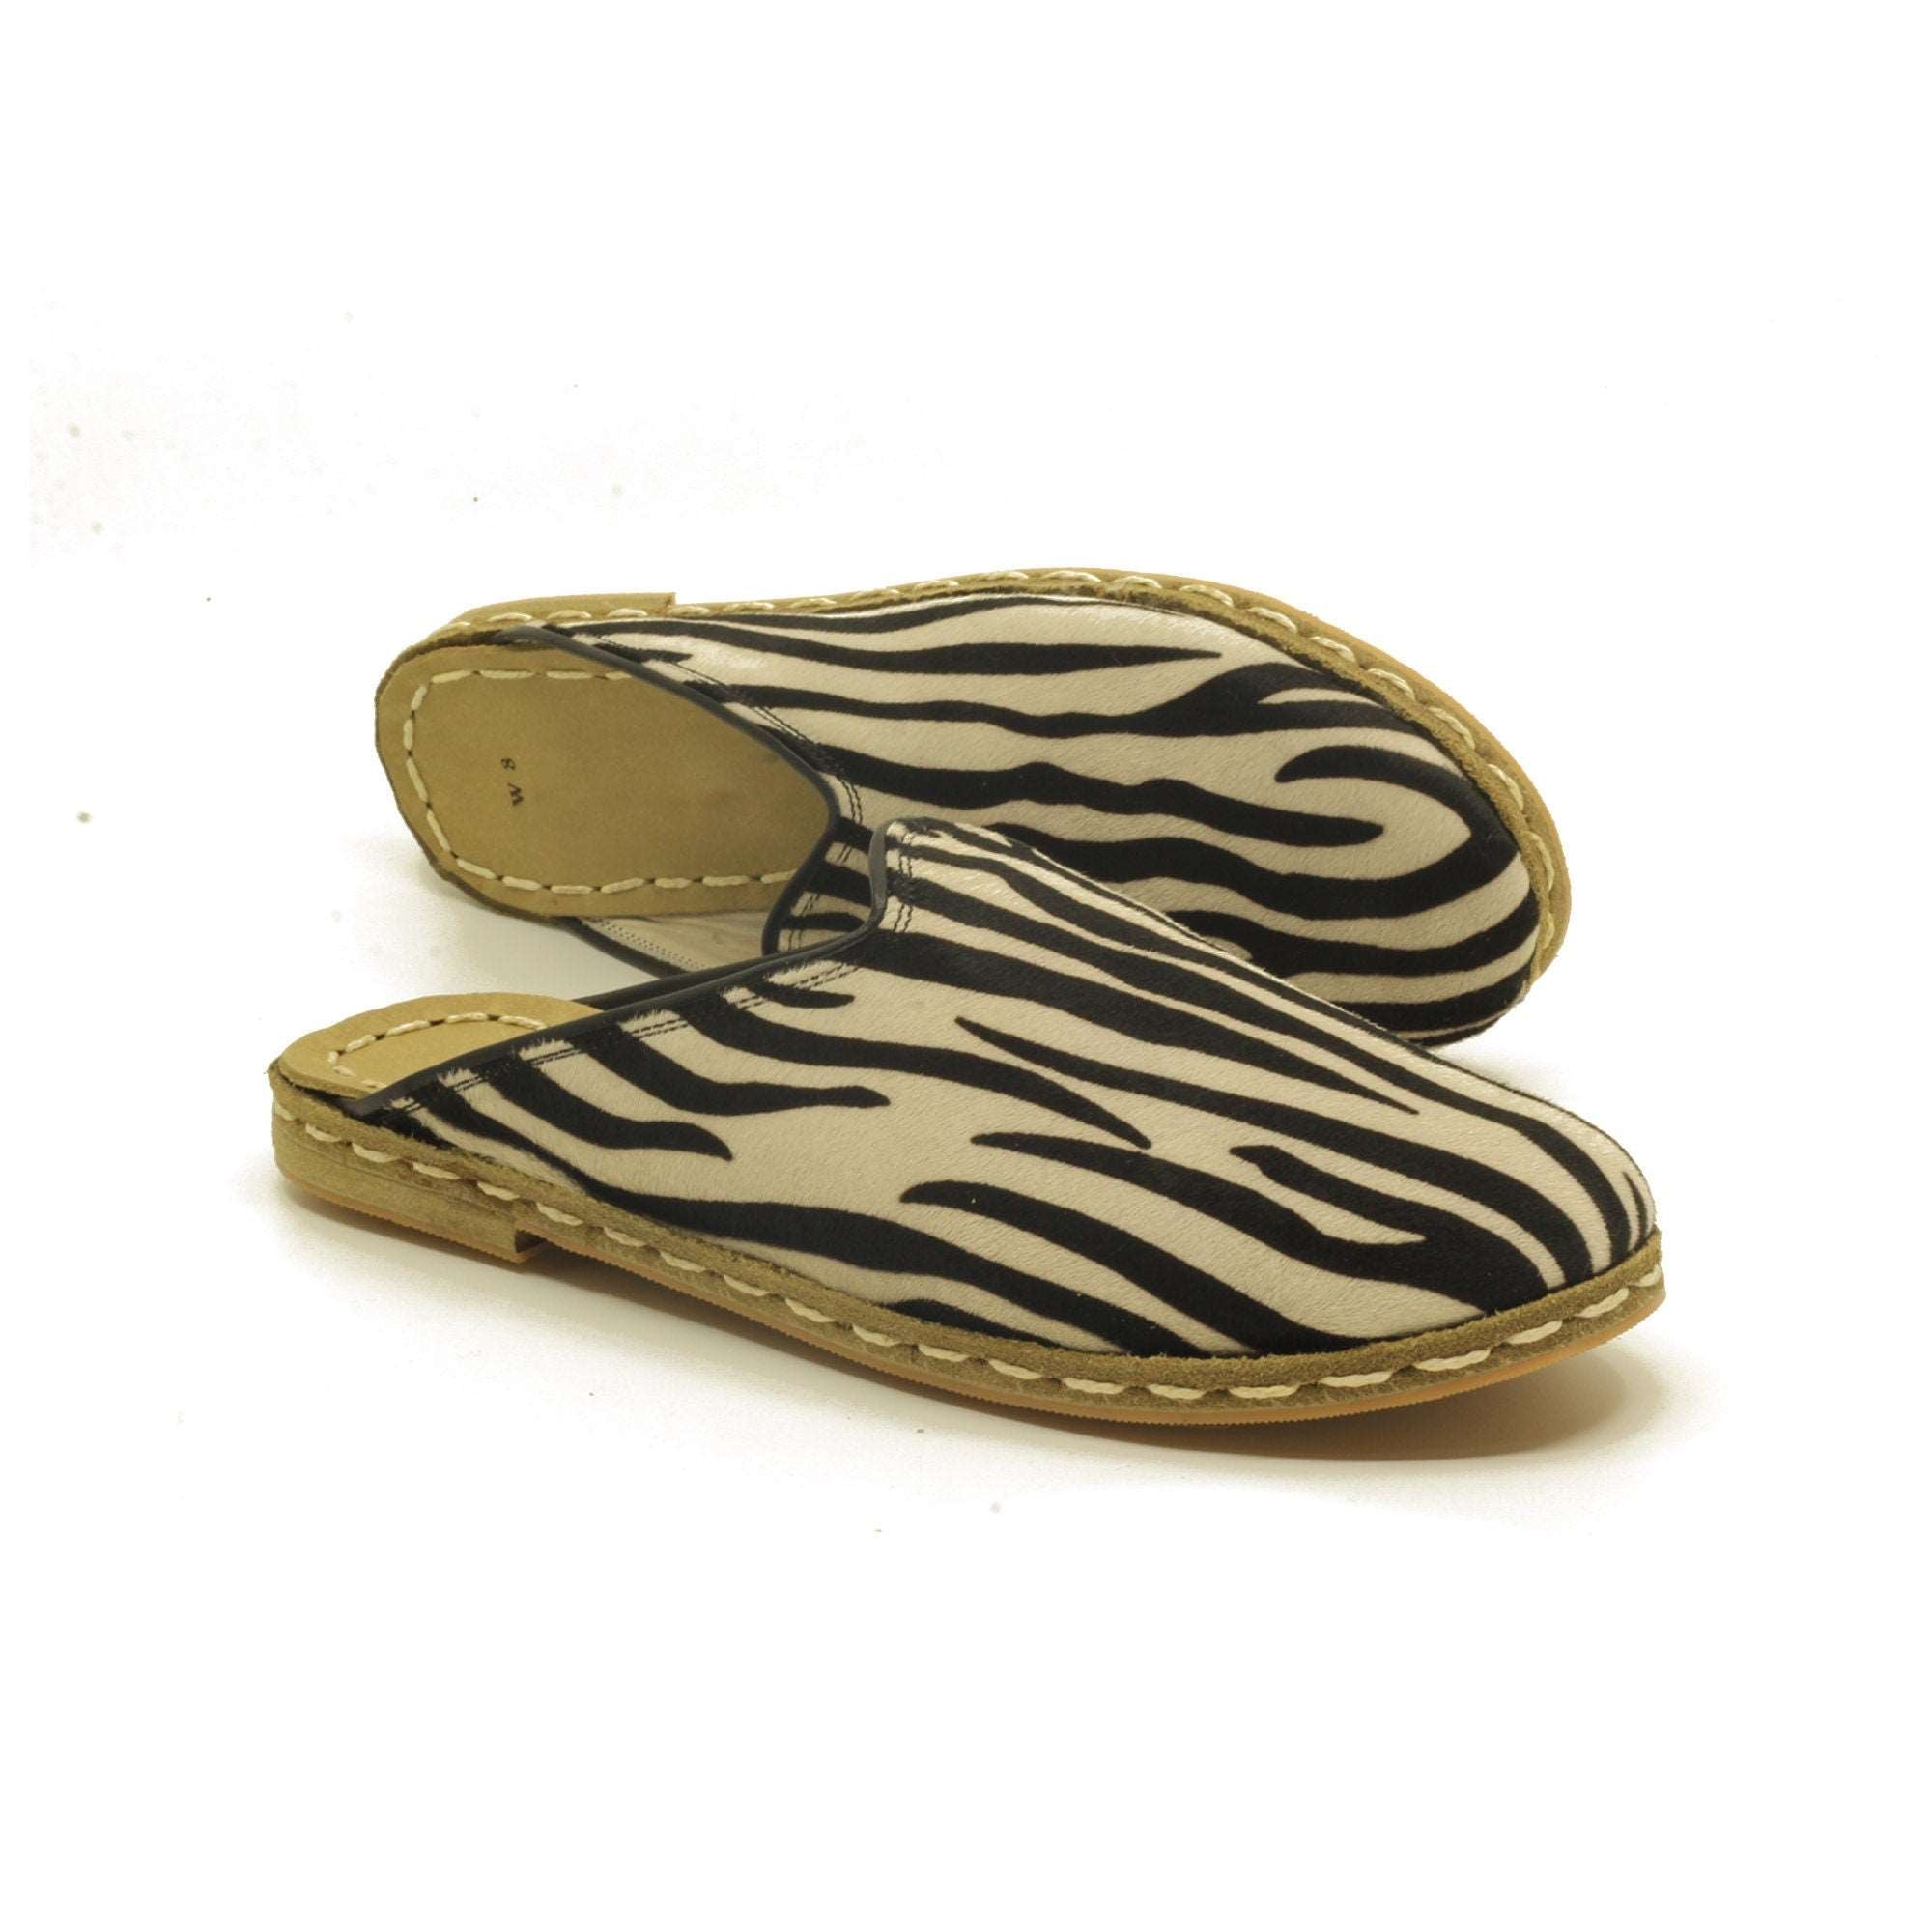 Animal Print Slippers on a Sandy Shore · Free Stock Photo